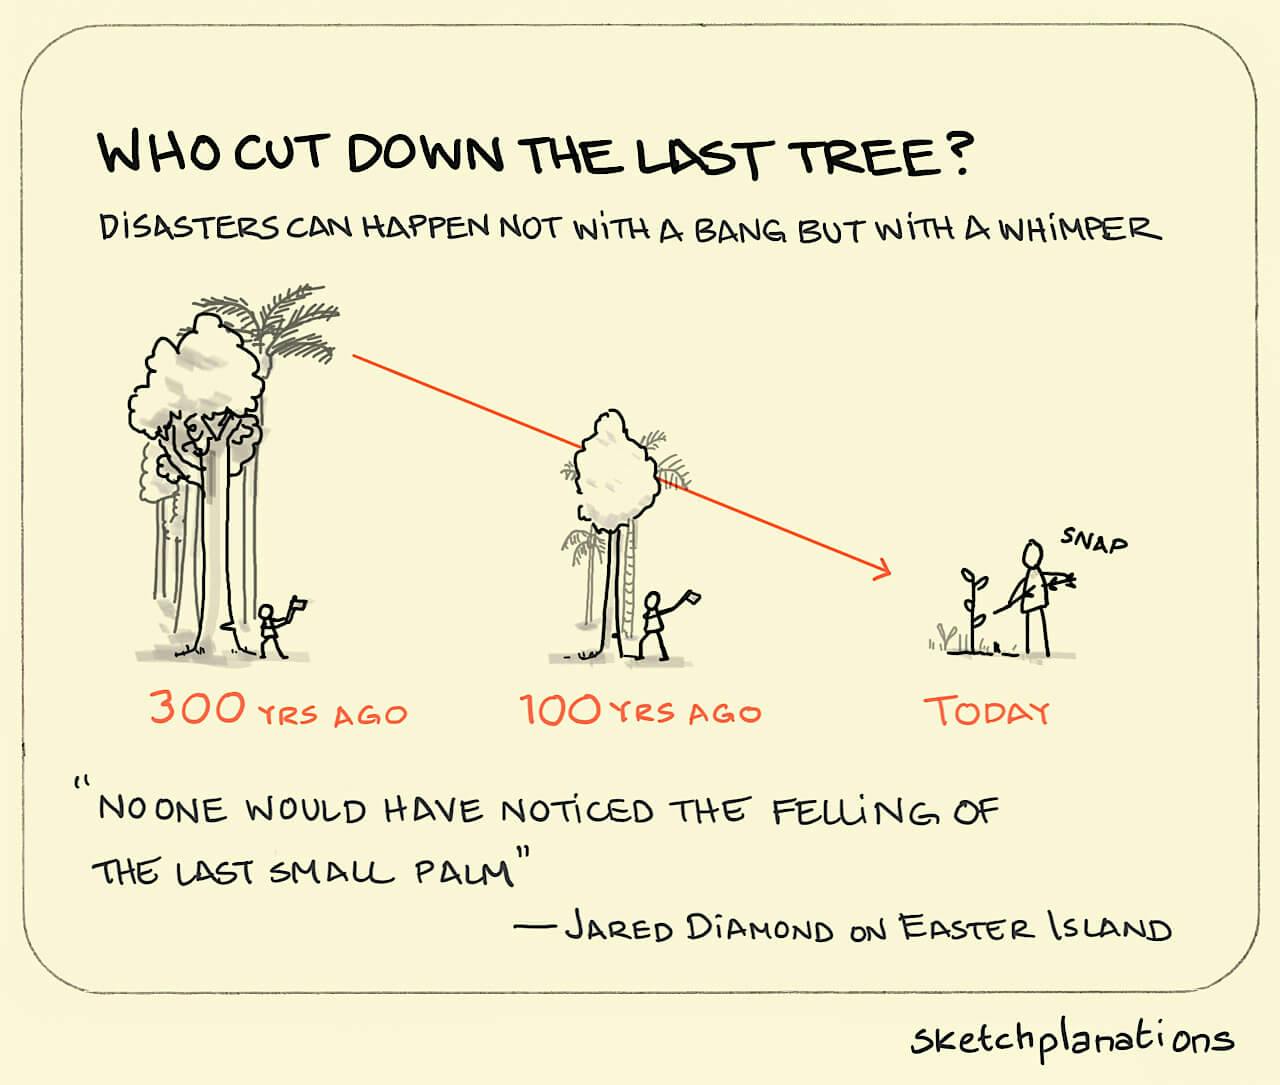 Who cut down the last tree illustration: 300 years ago we see someone cutting down a tree with an axe in a large dense forest. 100 years ago we see someone cutting down a tree in a now much more sparse forest. Today, there's only a small sapling left, and someone just snapped a branch off it. So what next? 